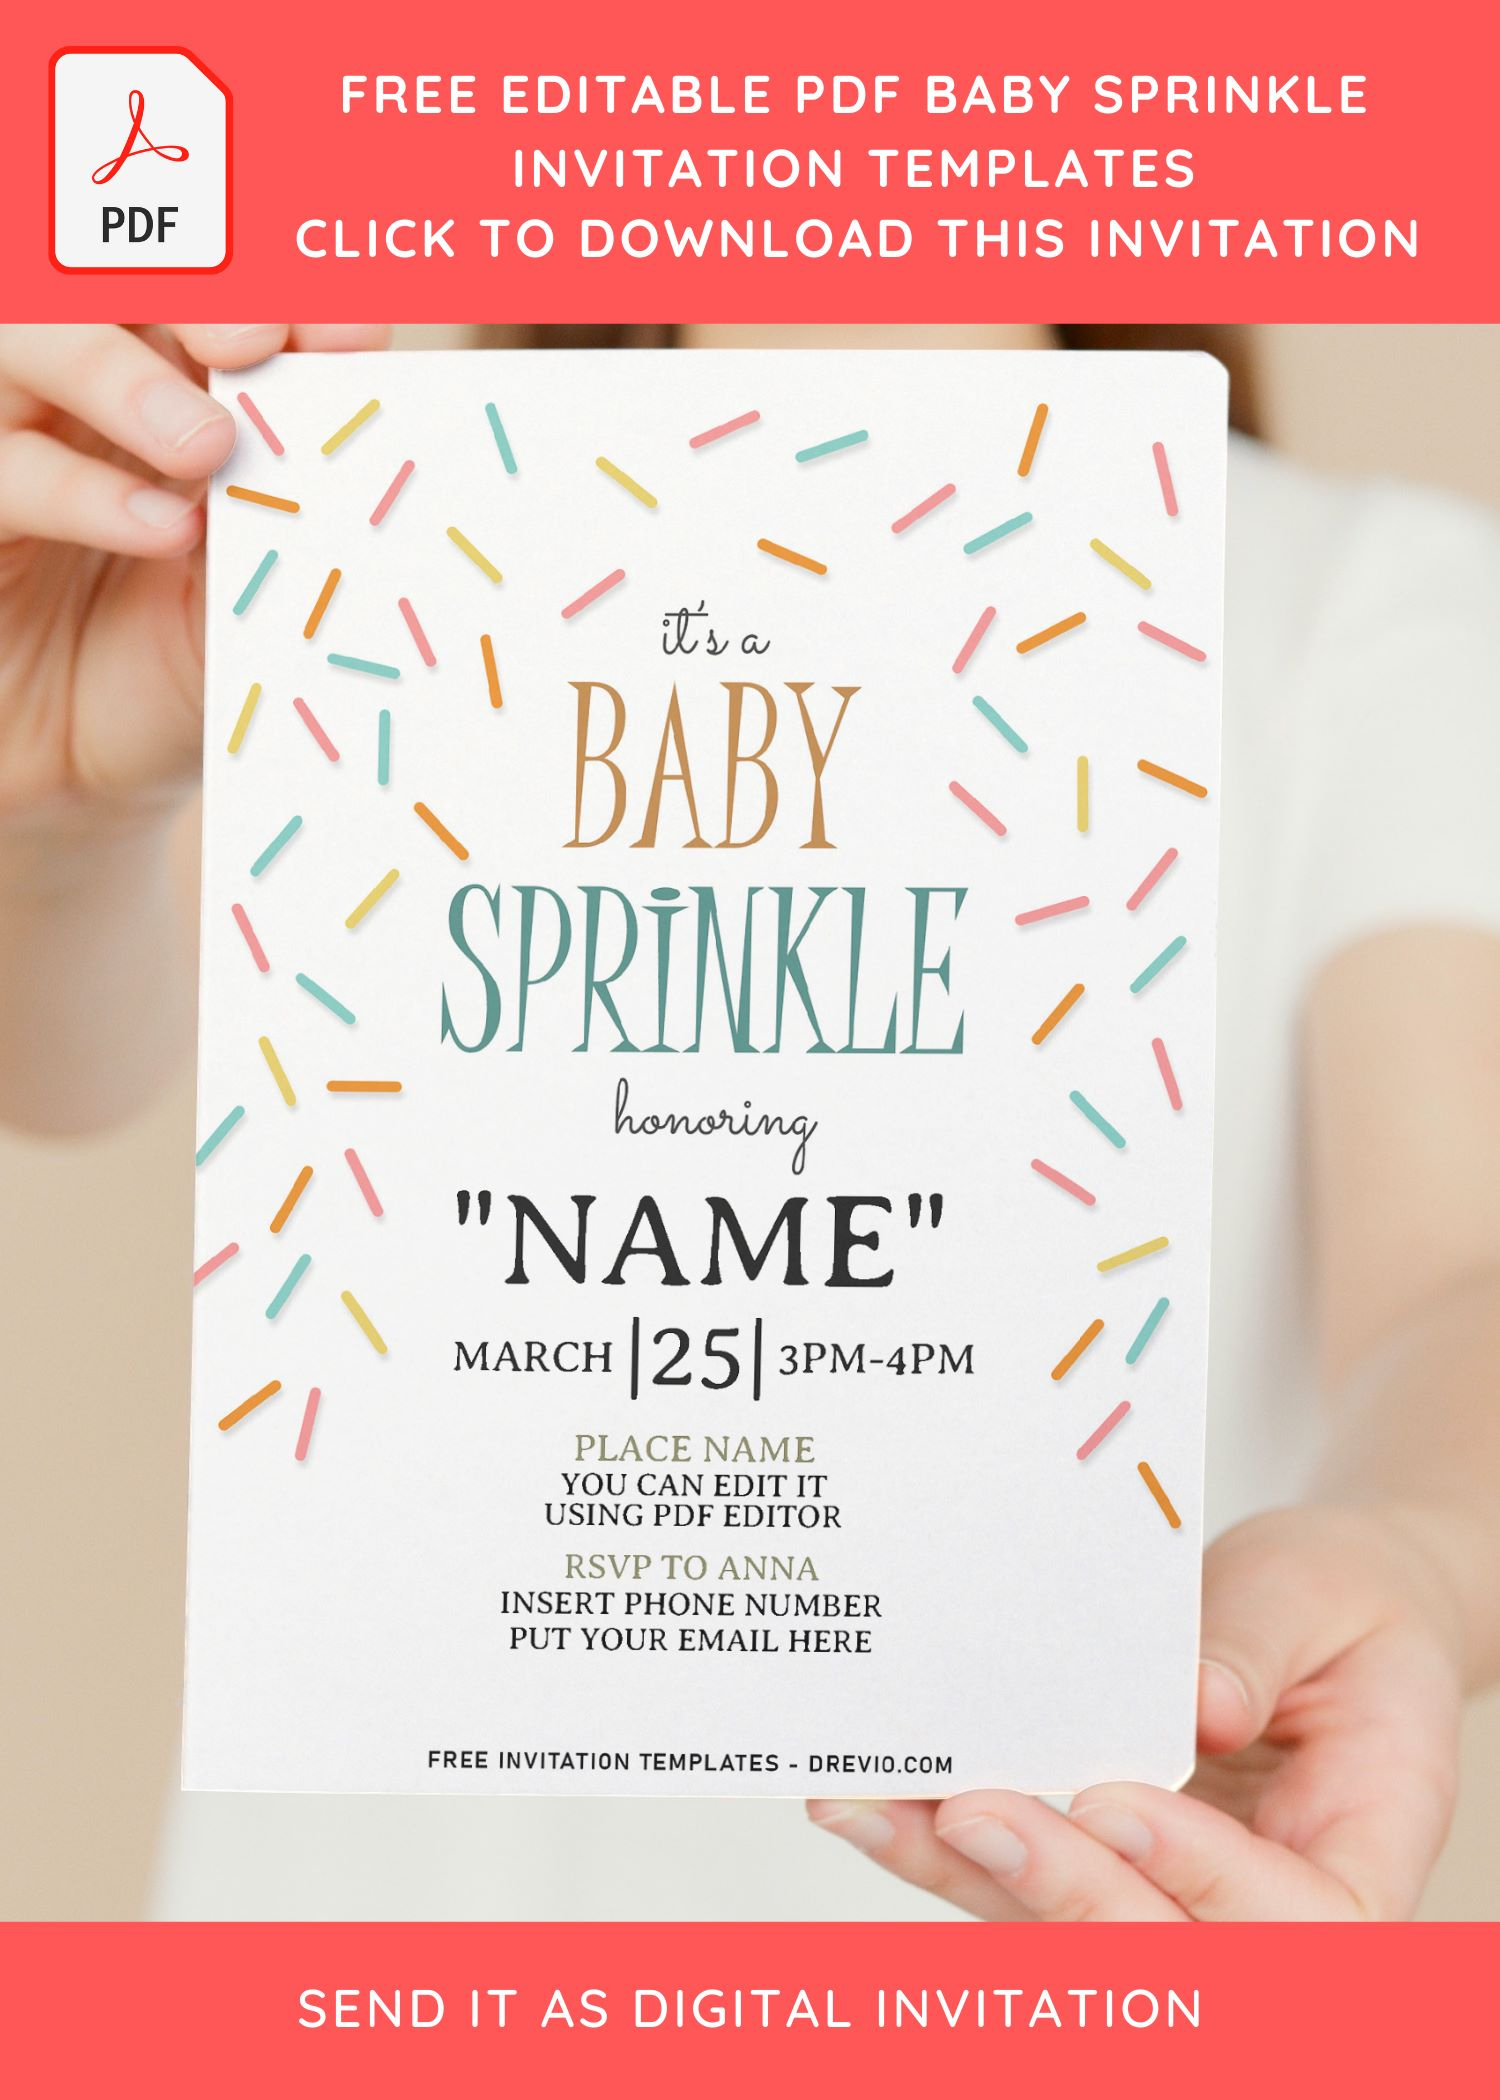 Free Editable Pdf) Baby Sprinkle Invitation Templates For All Ages with regard to Free Printable Baby Sprinkle Invitations